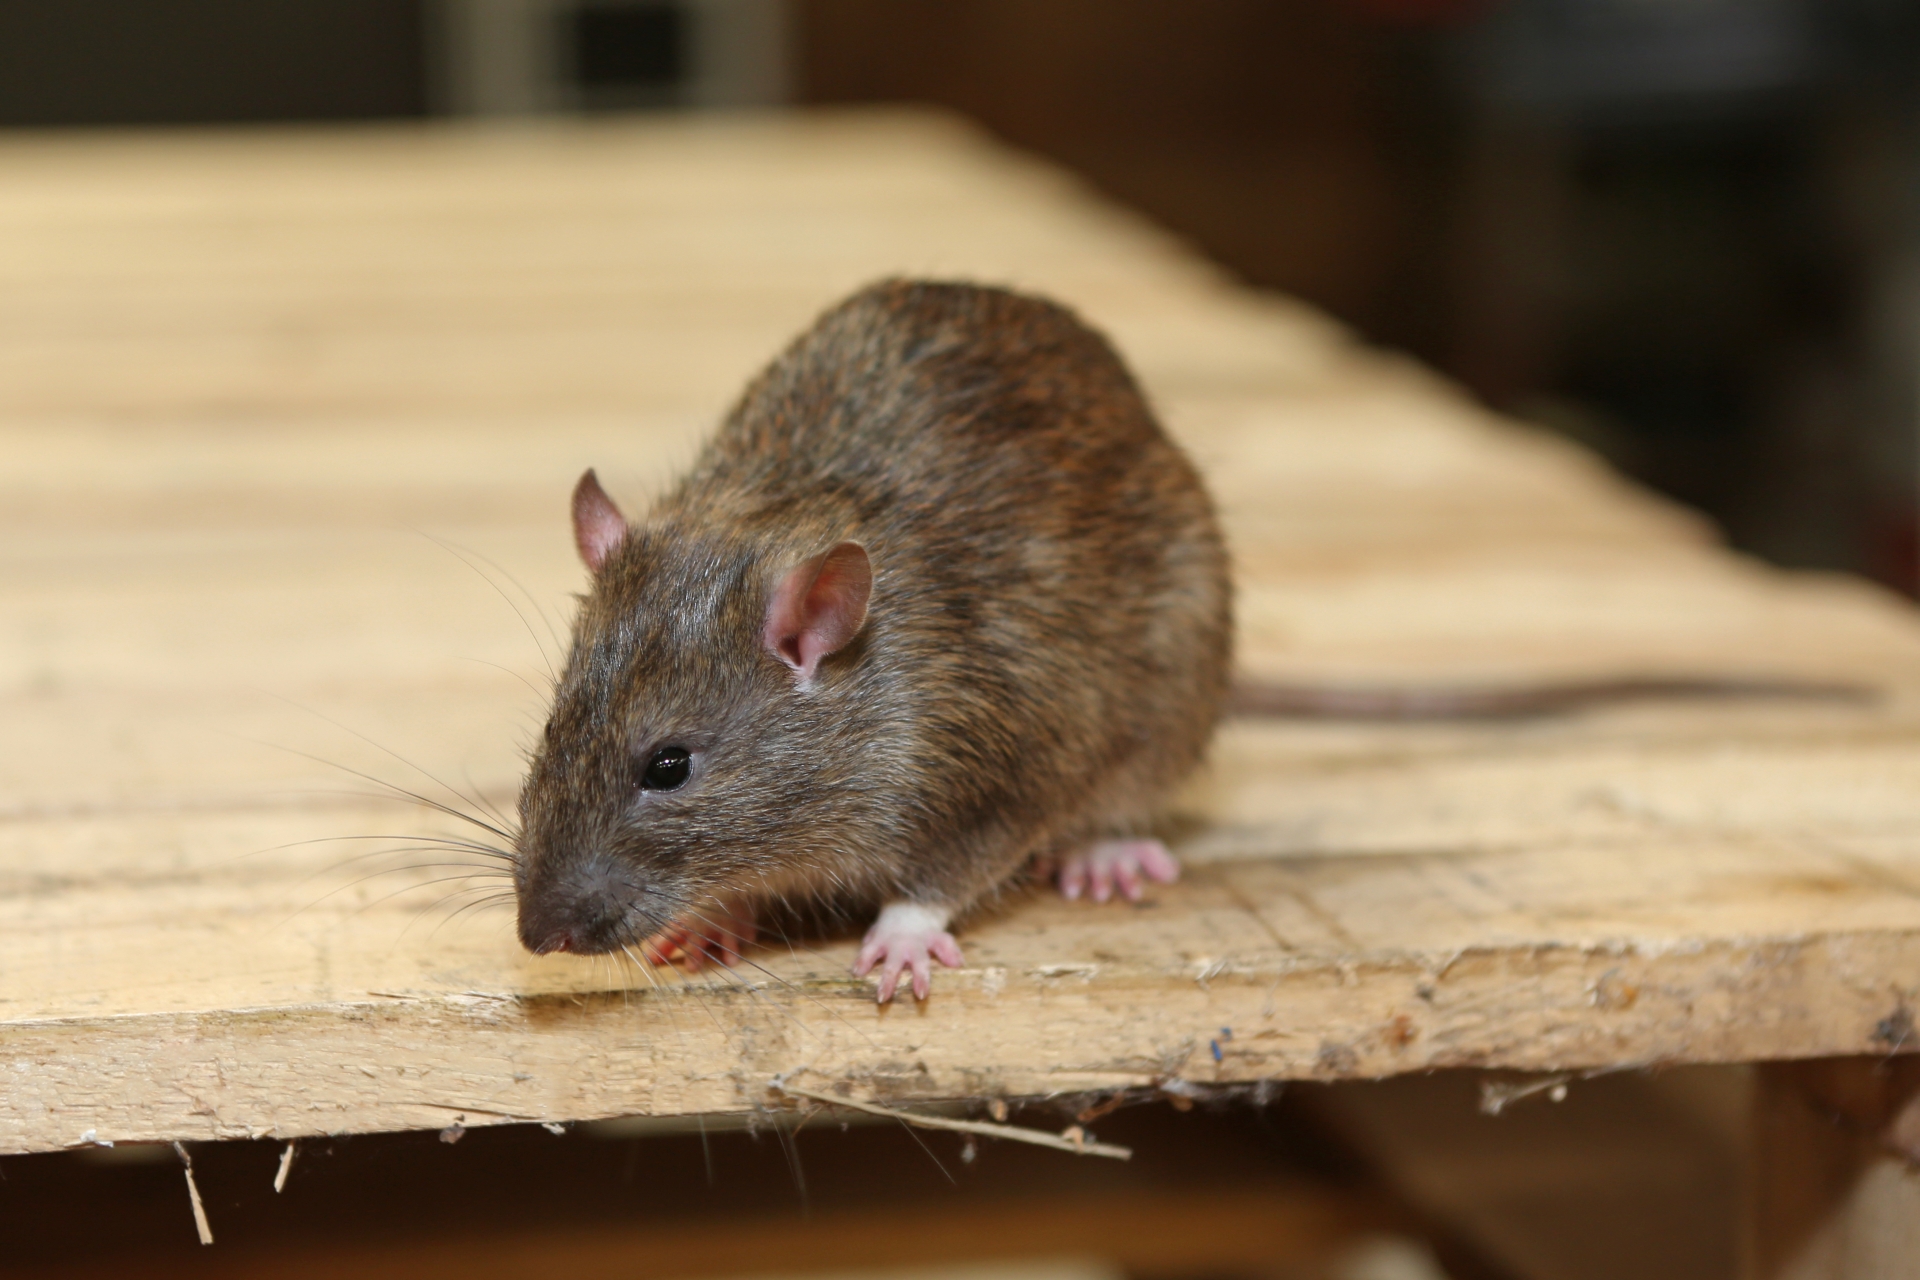 Rat Control, Pest Control in Greenford, UB6. Call Now 020 8166 9746